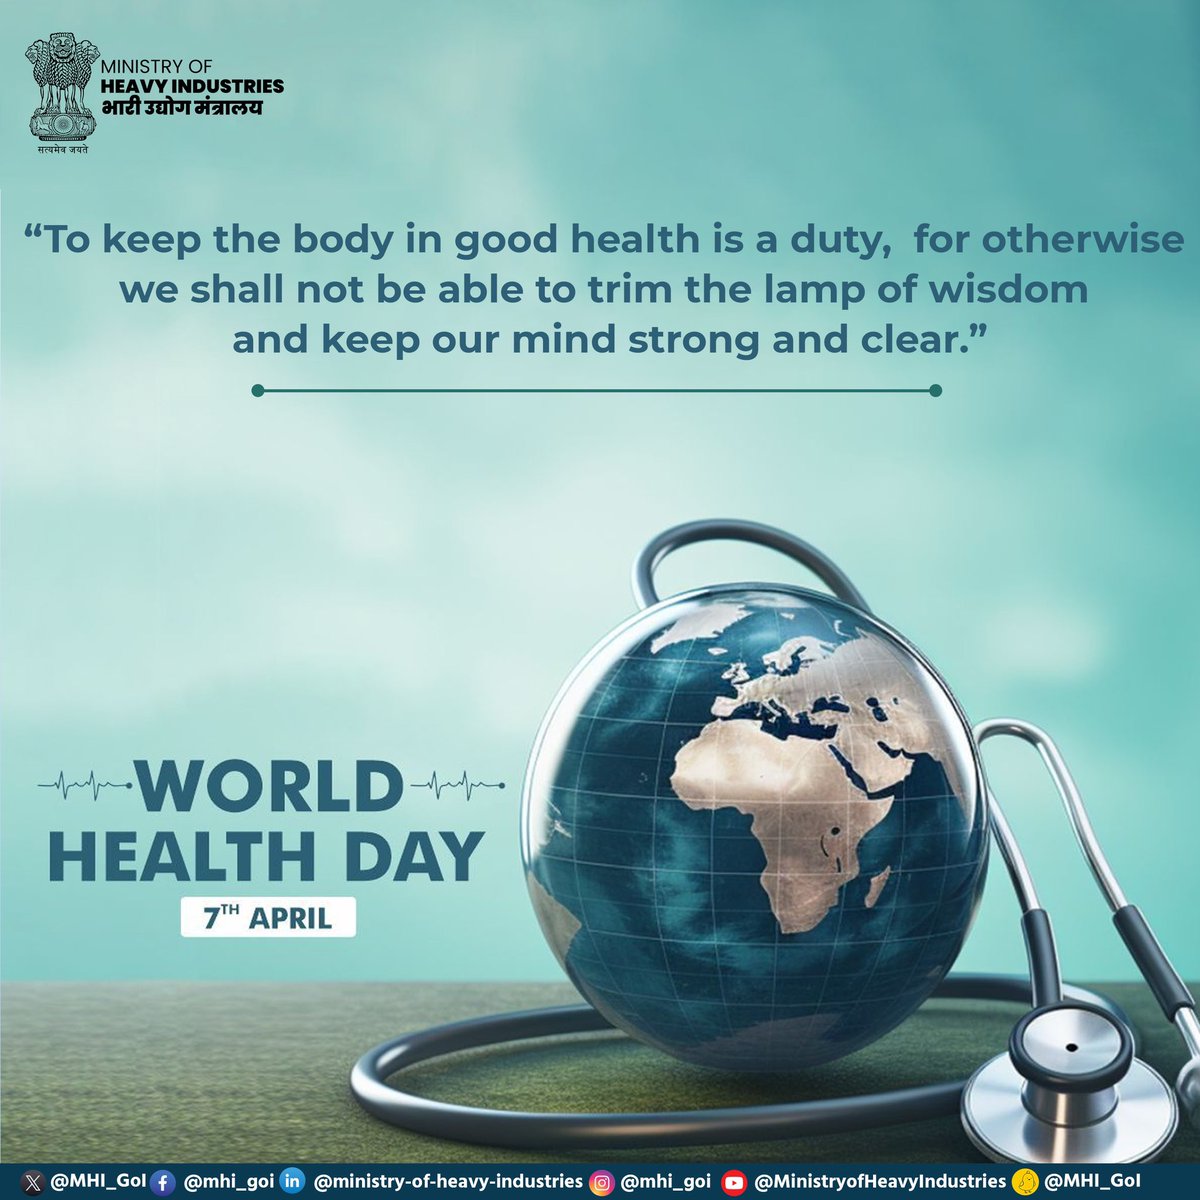 Happy World Health Day! Let's prioritize wellness, encourage healthy habits, and unite to create a happier, healthier world for everyone. #WorldHealthDay #HealthForAll 🌍🏥